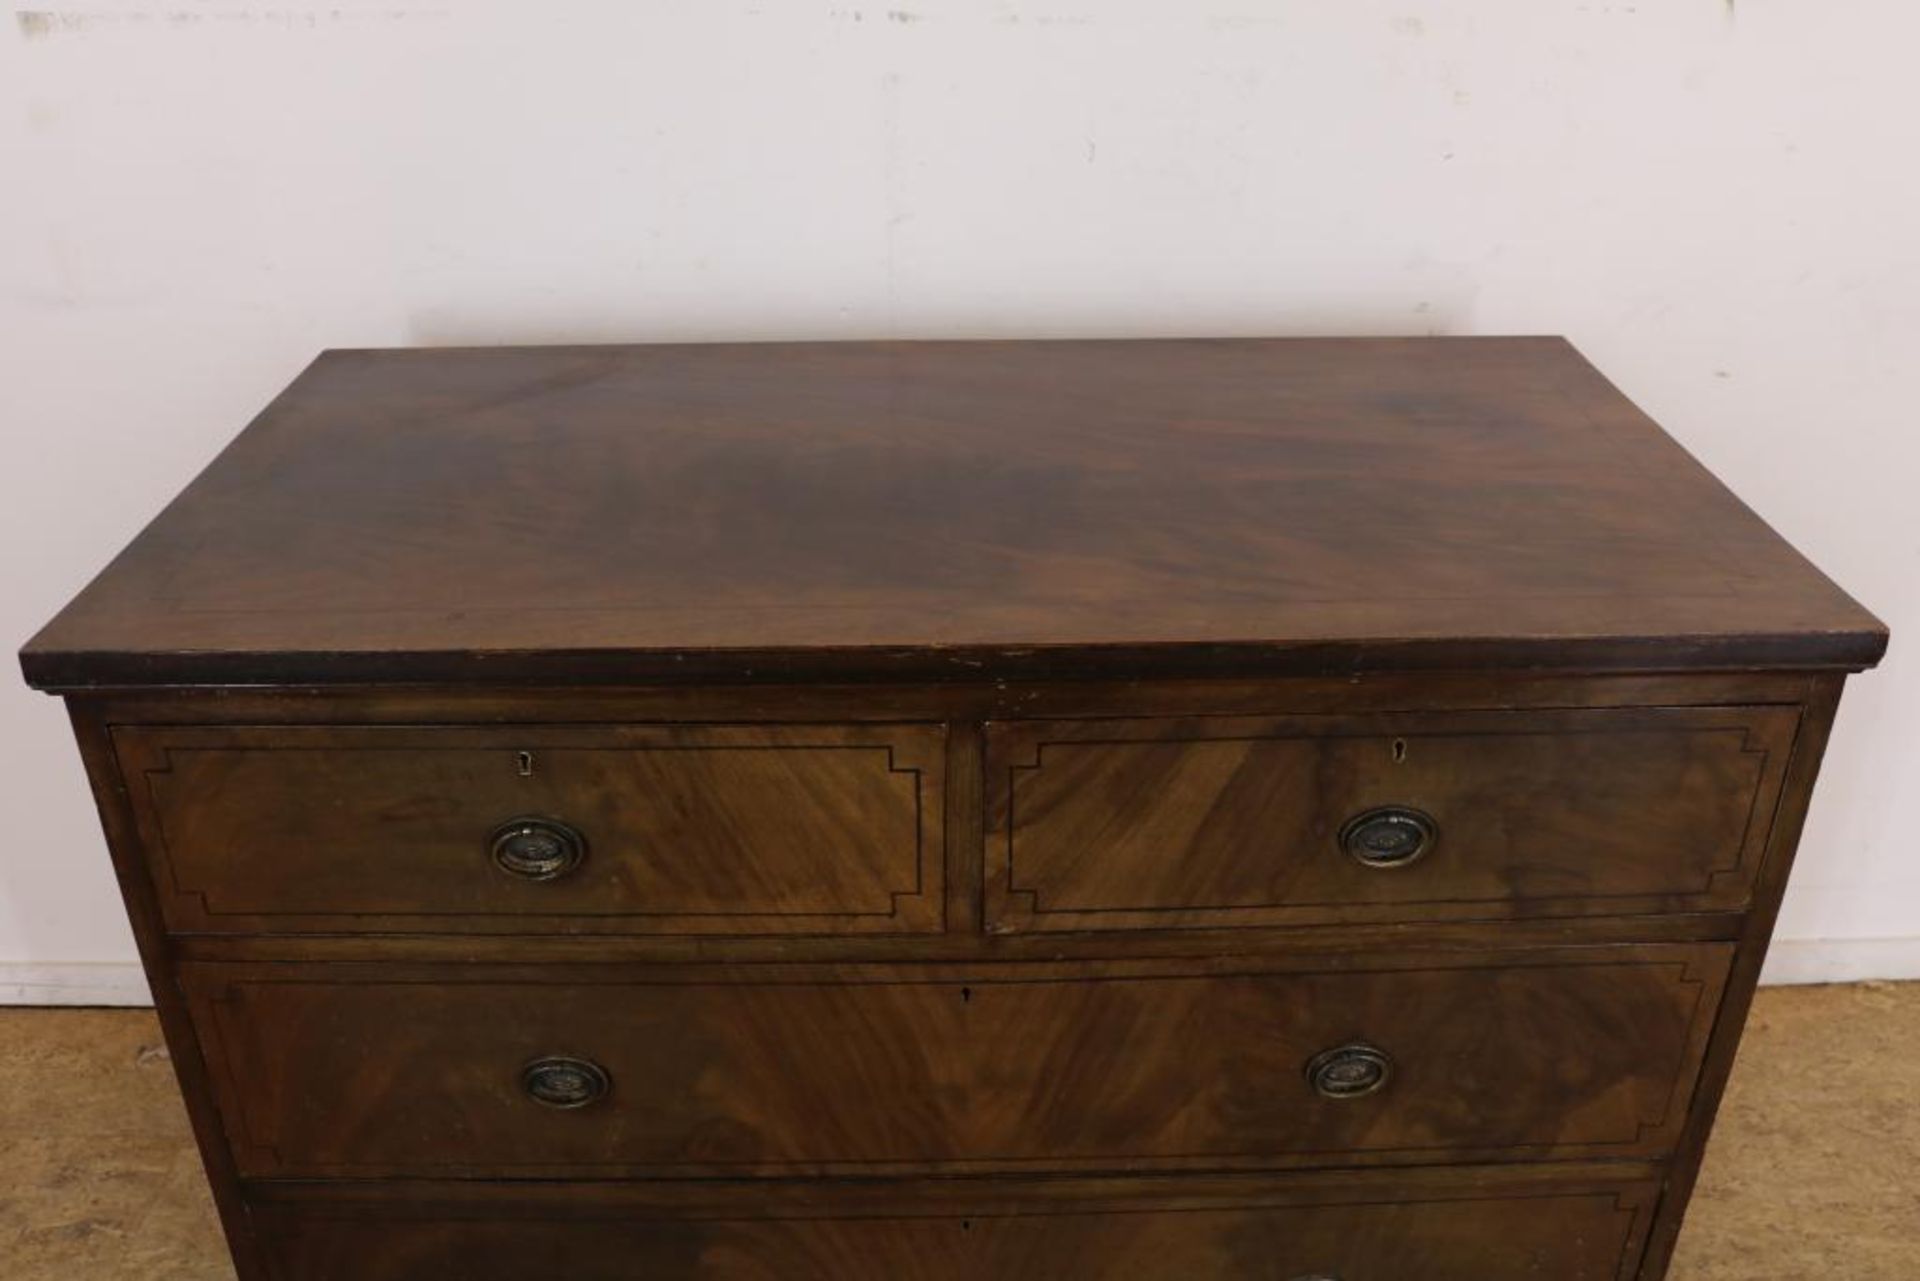 Mahogany Edwardiaan Hobbs & Co londen chest with 4 drawers, England ca. 1900. (Maple & Co) - Bild 2 aus 5